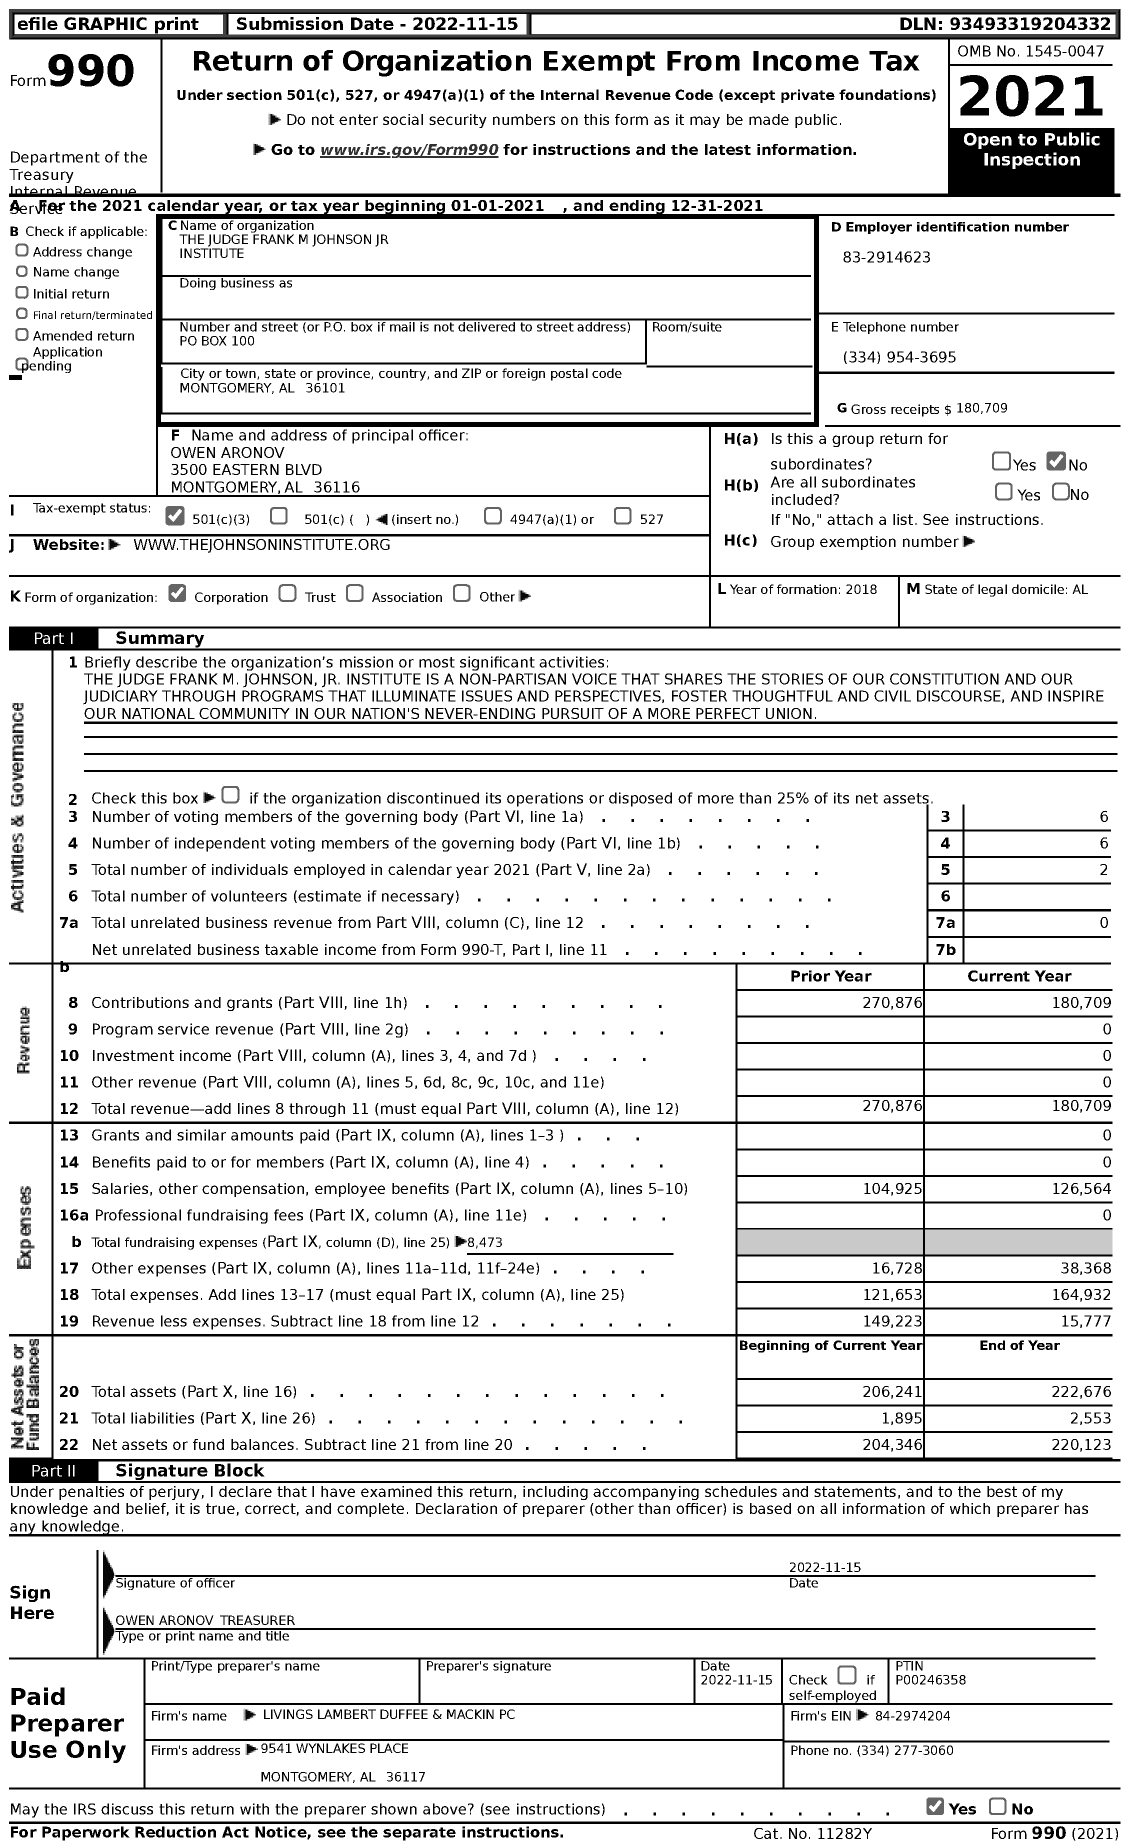 Image of first page of 2021 Form 990 for The Judge Frank M Johnson JR Institute